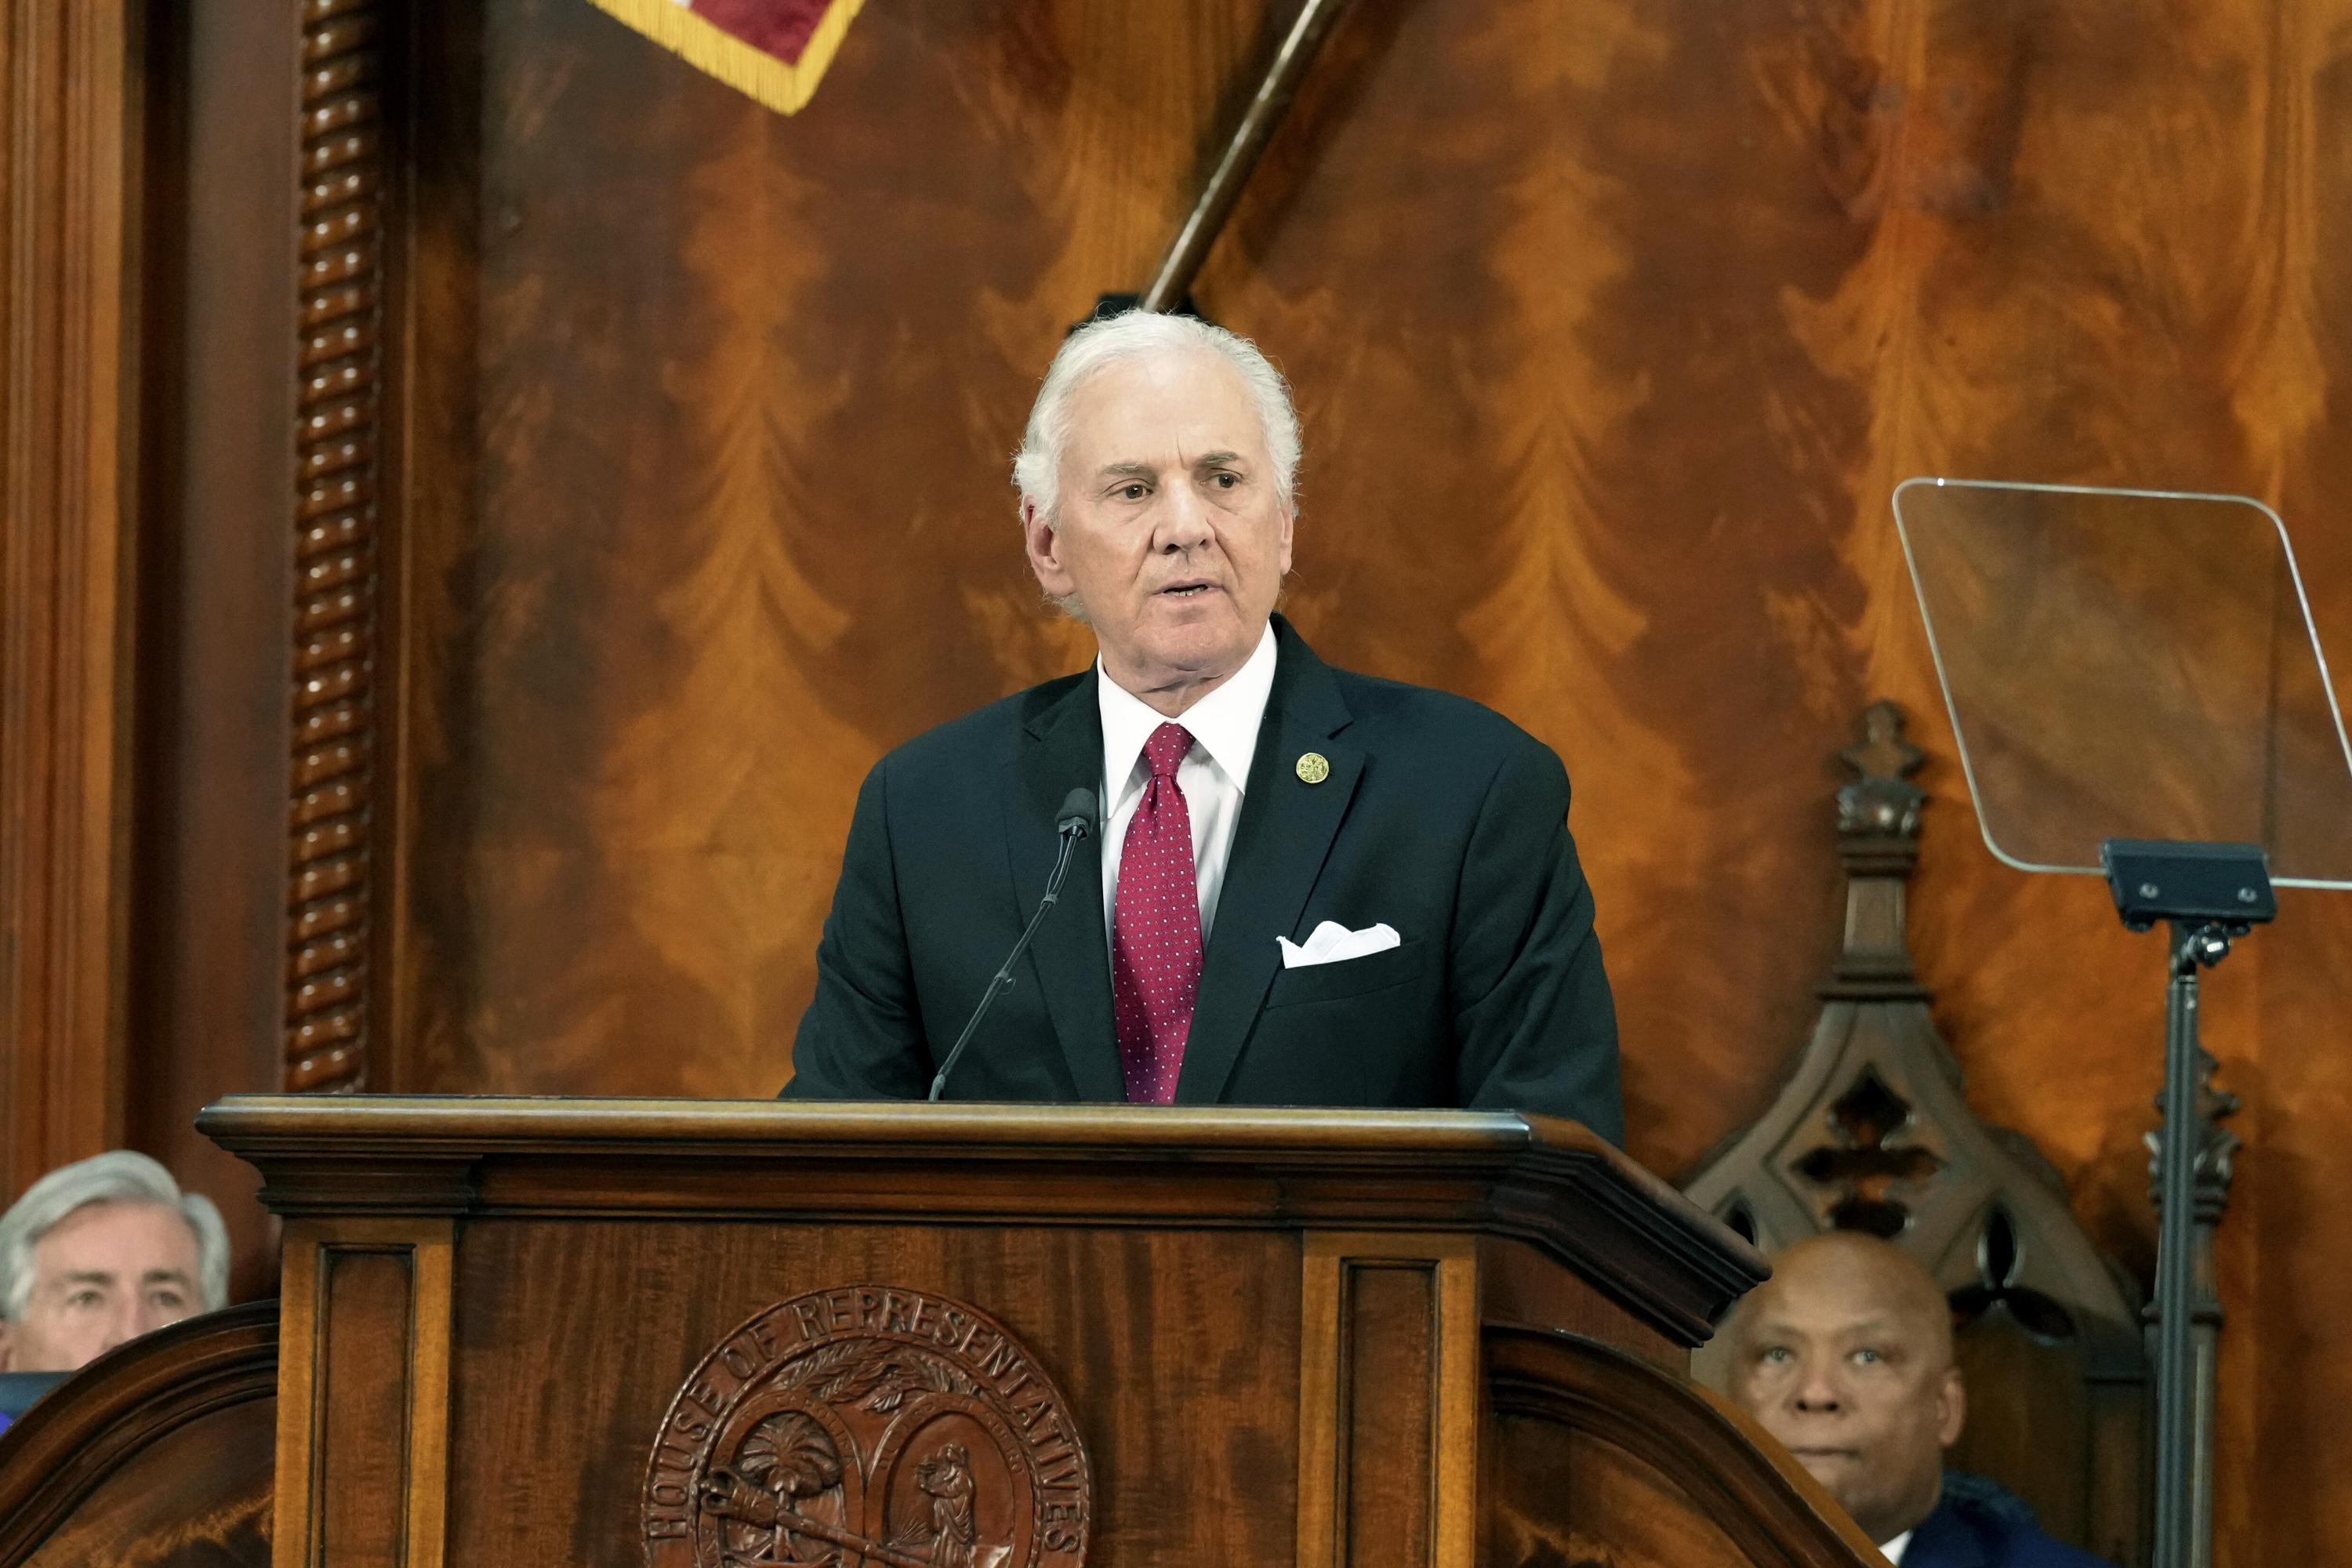 SC governor renews push for abortion ban in State of State